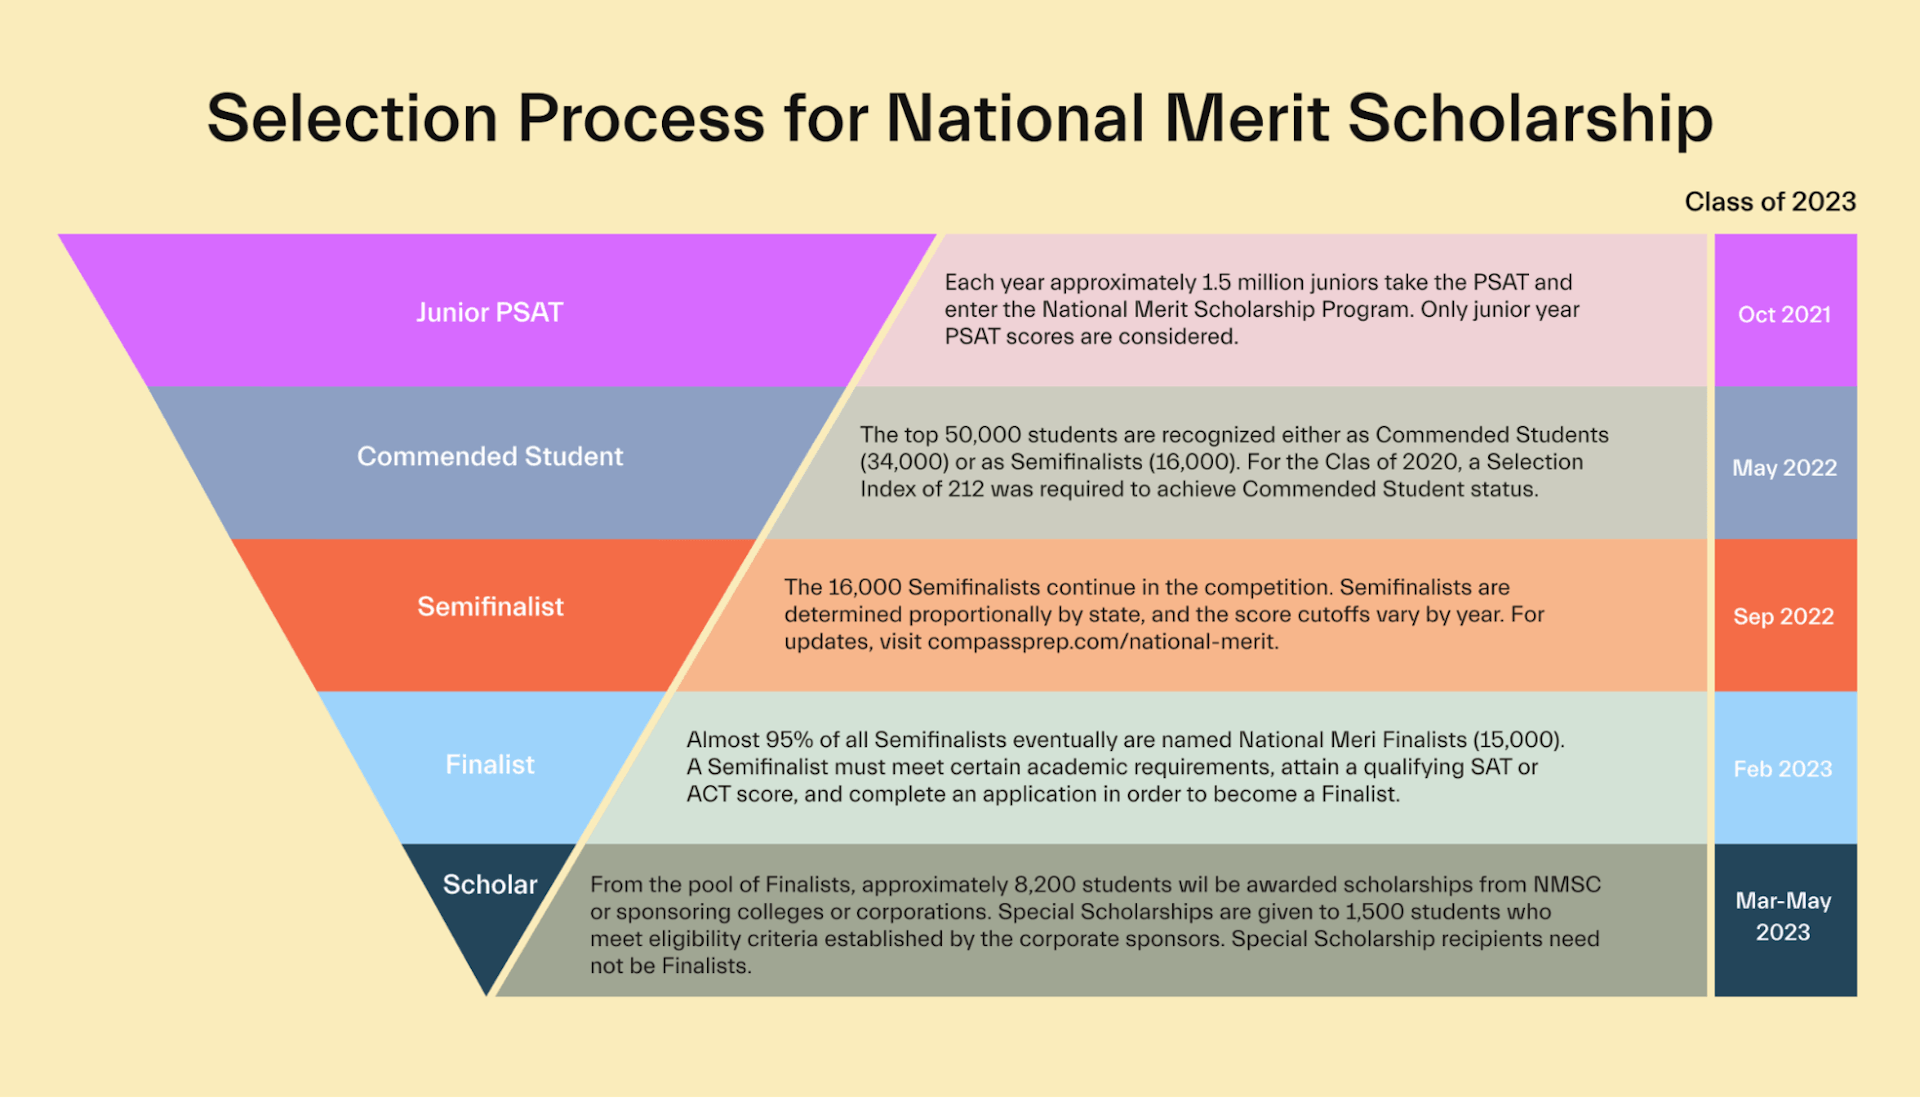 What is the national merit scholarship, and how do I apply?